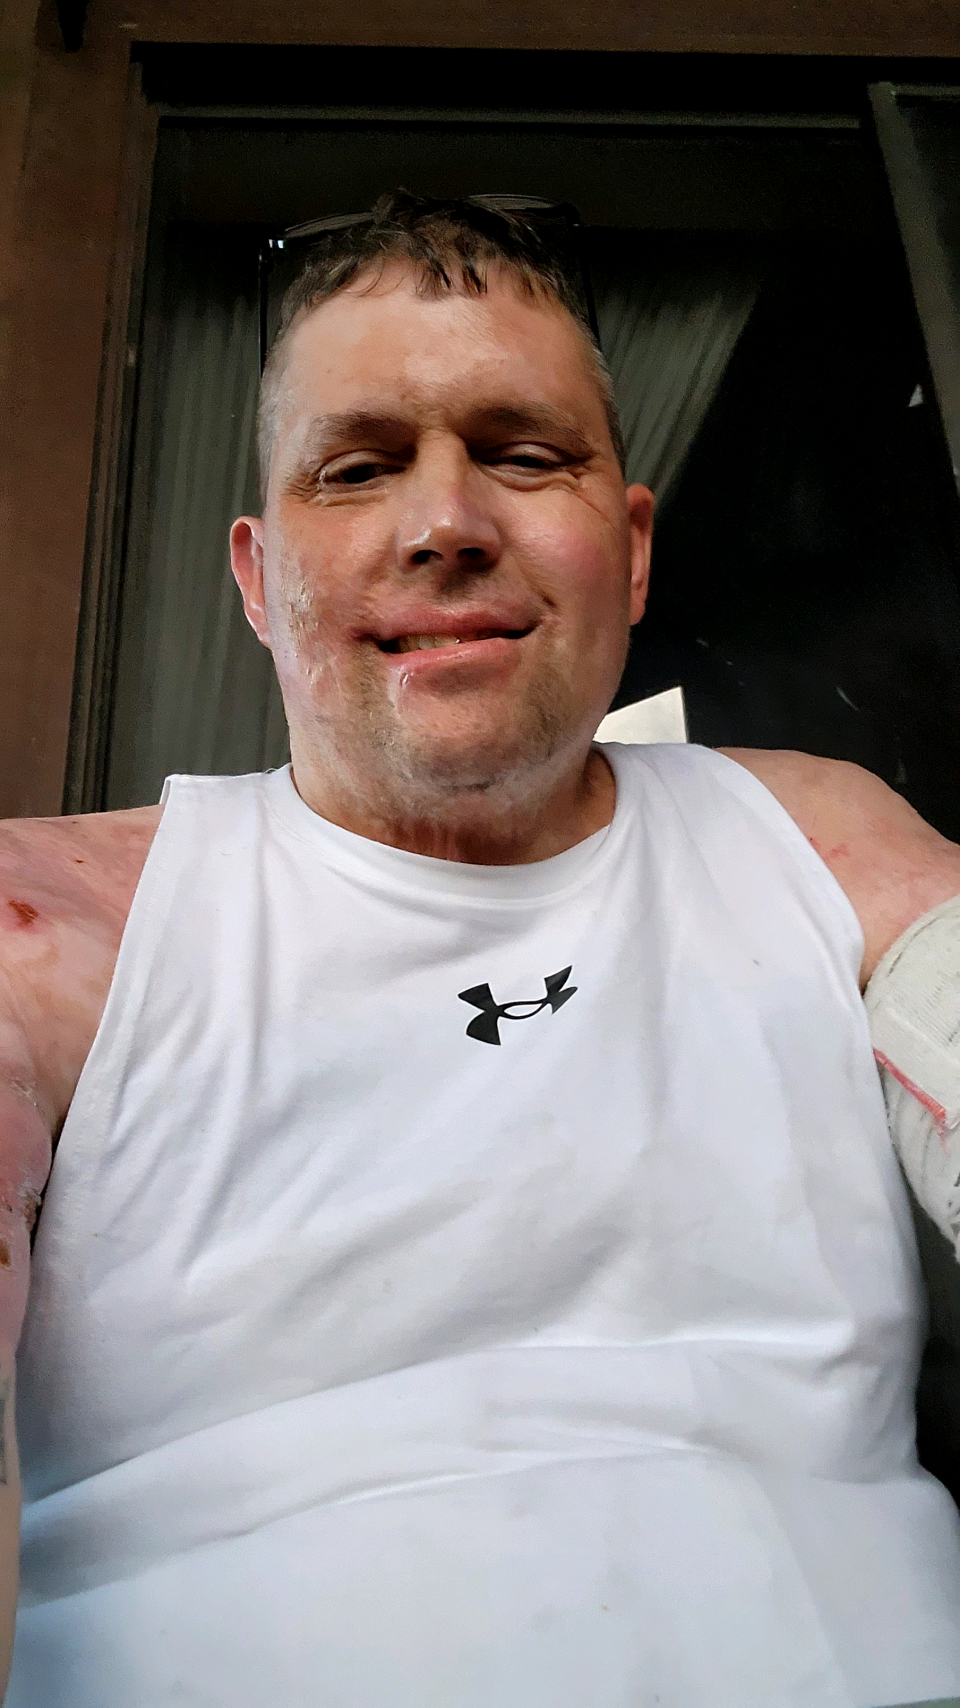 Almost a year after he was at electrocuted and badly burned over 28% of his body, Jason Shields has many of his bandages removed. He will need another year of recovery.